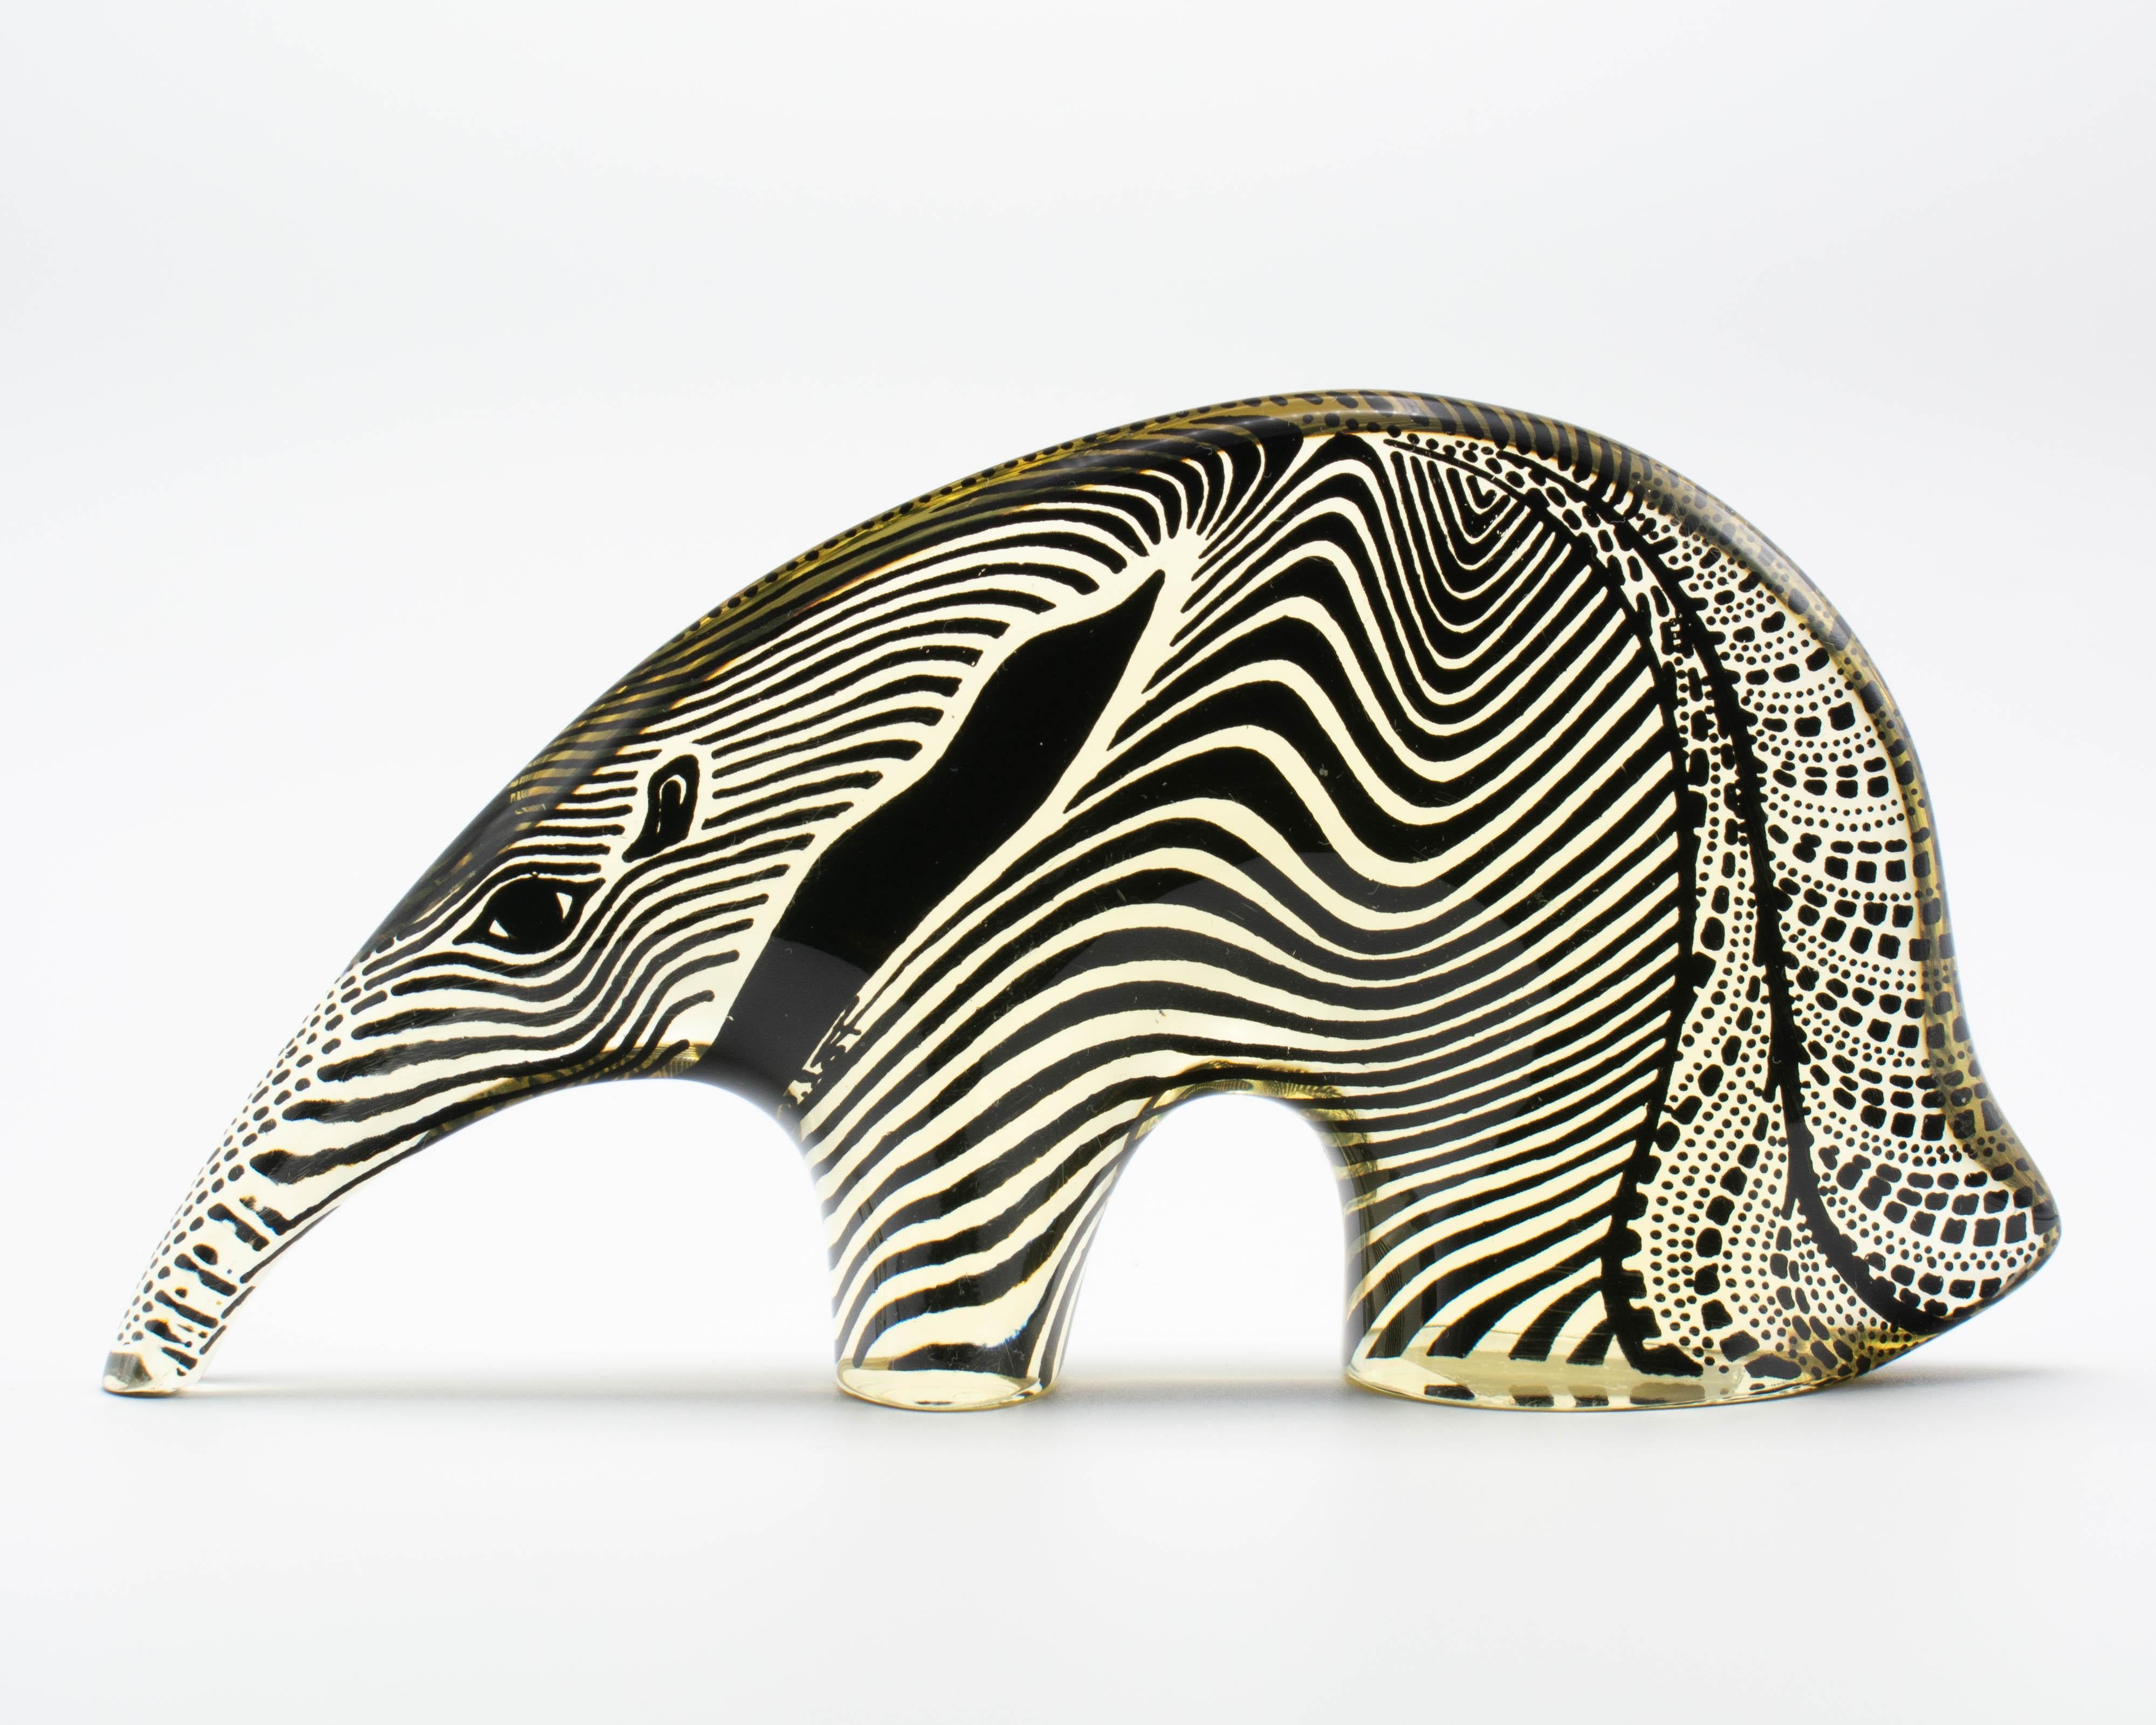 A Mid-Century Modern Lucite Op Art anteater designed by Abraham Palatnik. Remnant of label on bottom. Abraham Palatnik (born in 1928) is a Brazilian artist and inventor whose innovations include kinechromatic art. Part of the Artemis collection that